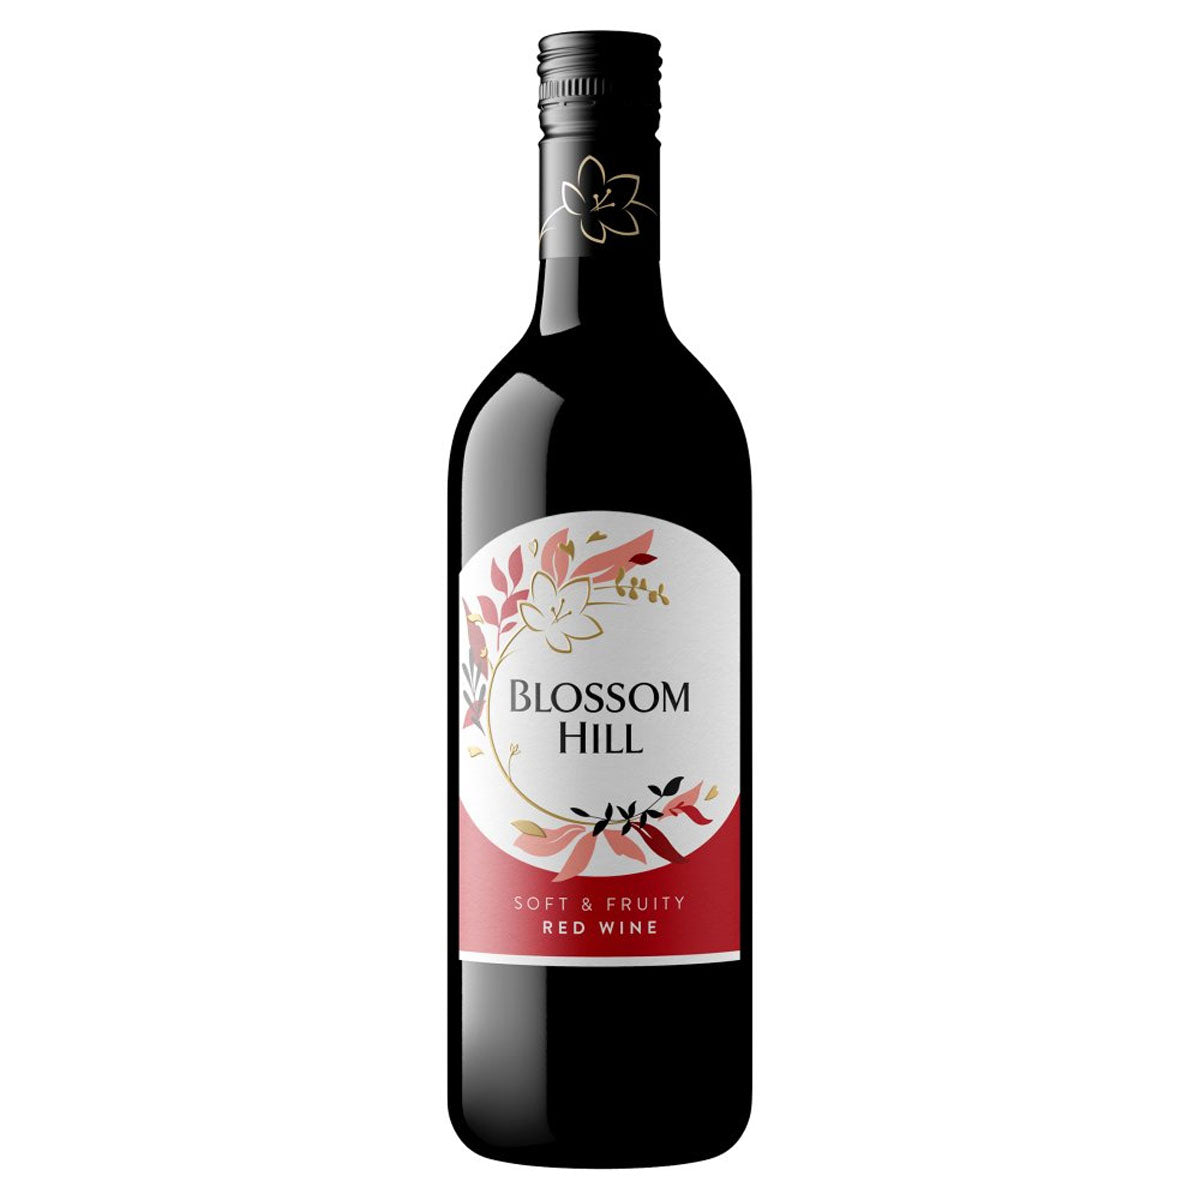 A bottle of Blossom Hill - Soft & Fruity Red Wine (12.5% ABV) - 750ml with the label blossom hill.